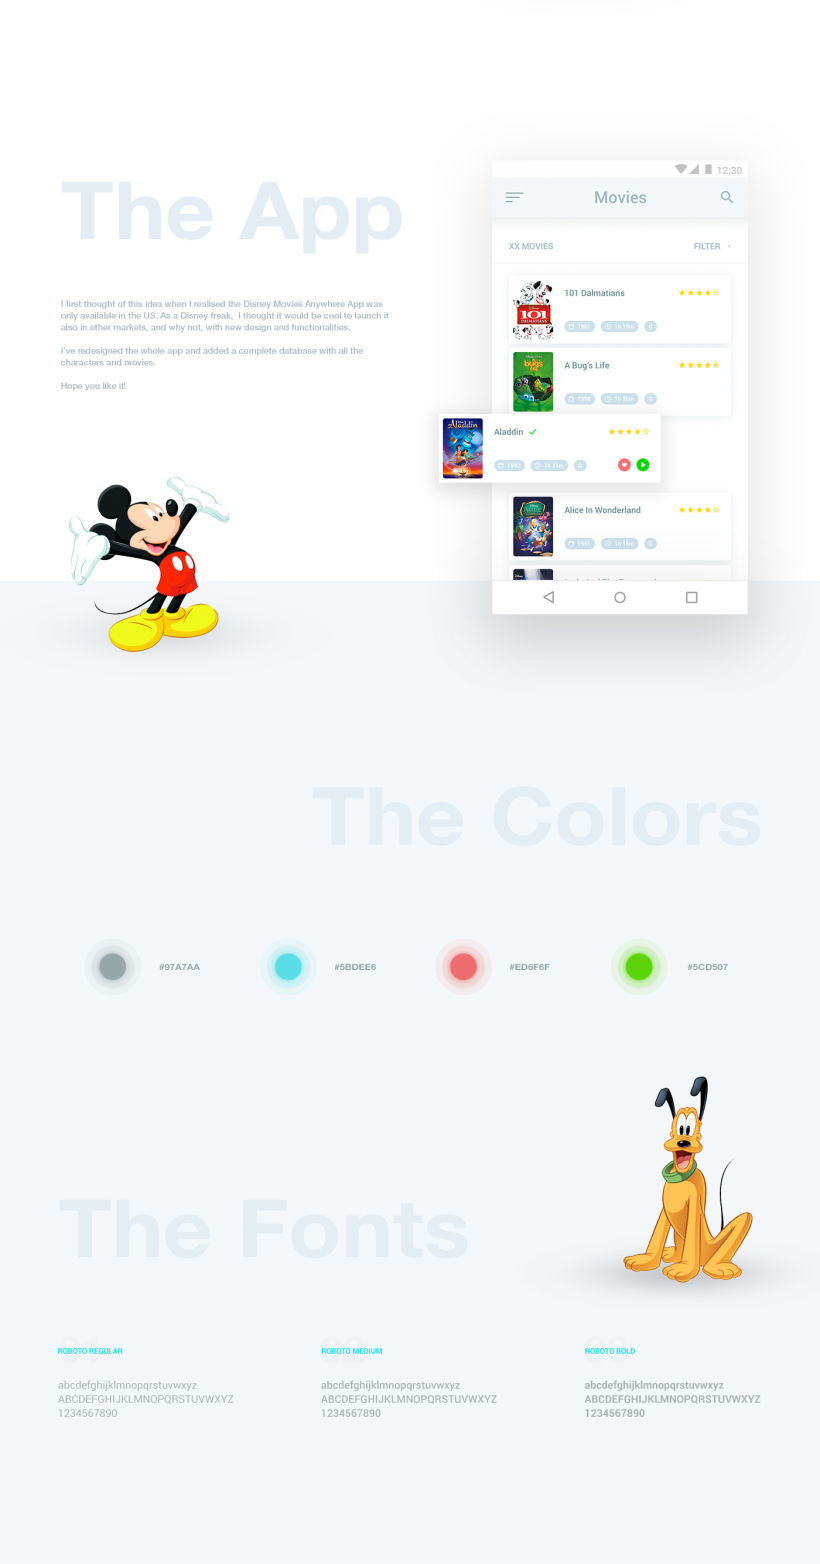 Disney Movies Anywhere - Mobile App Redesign 0